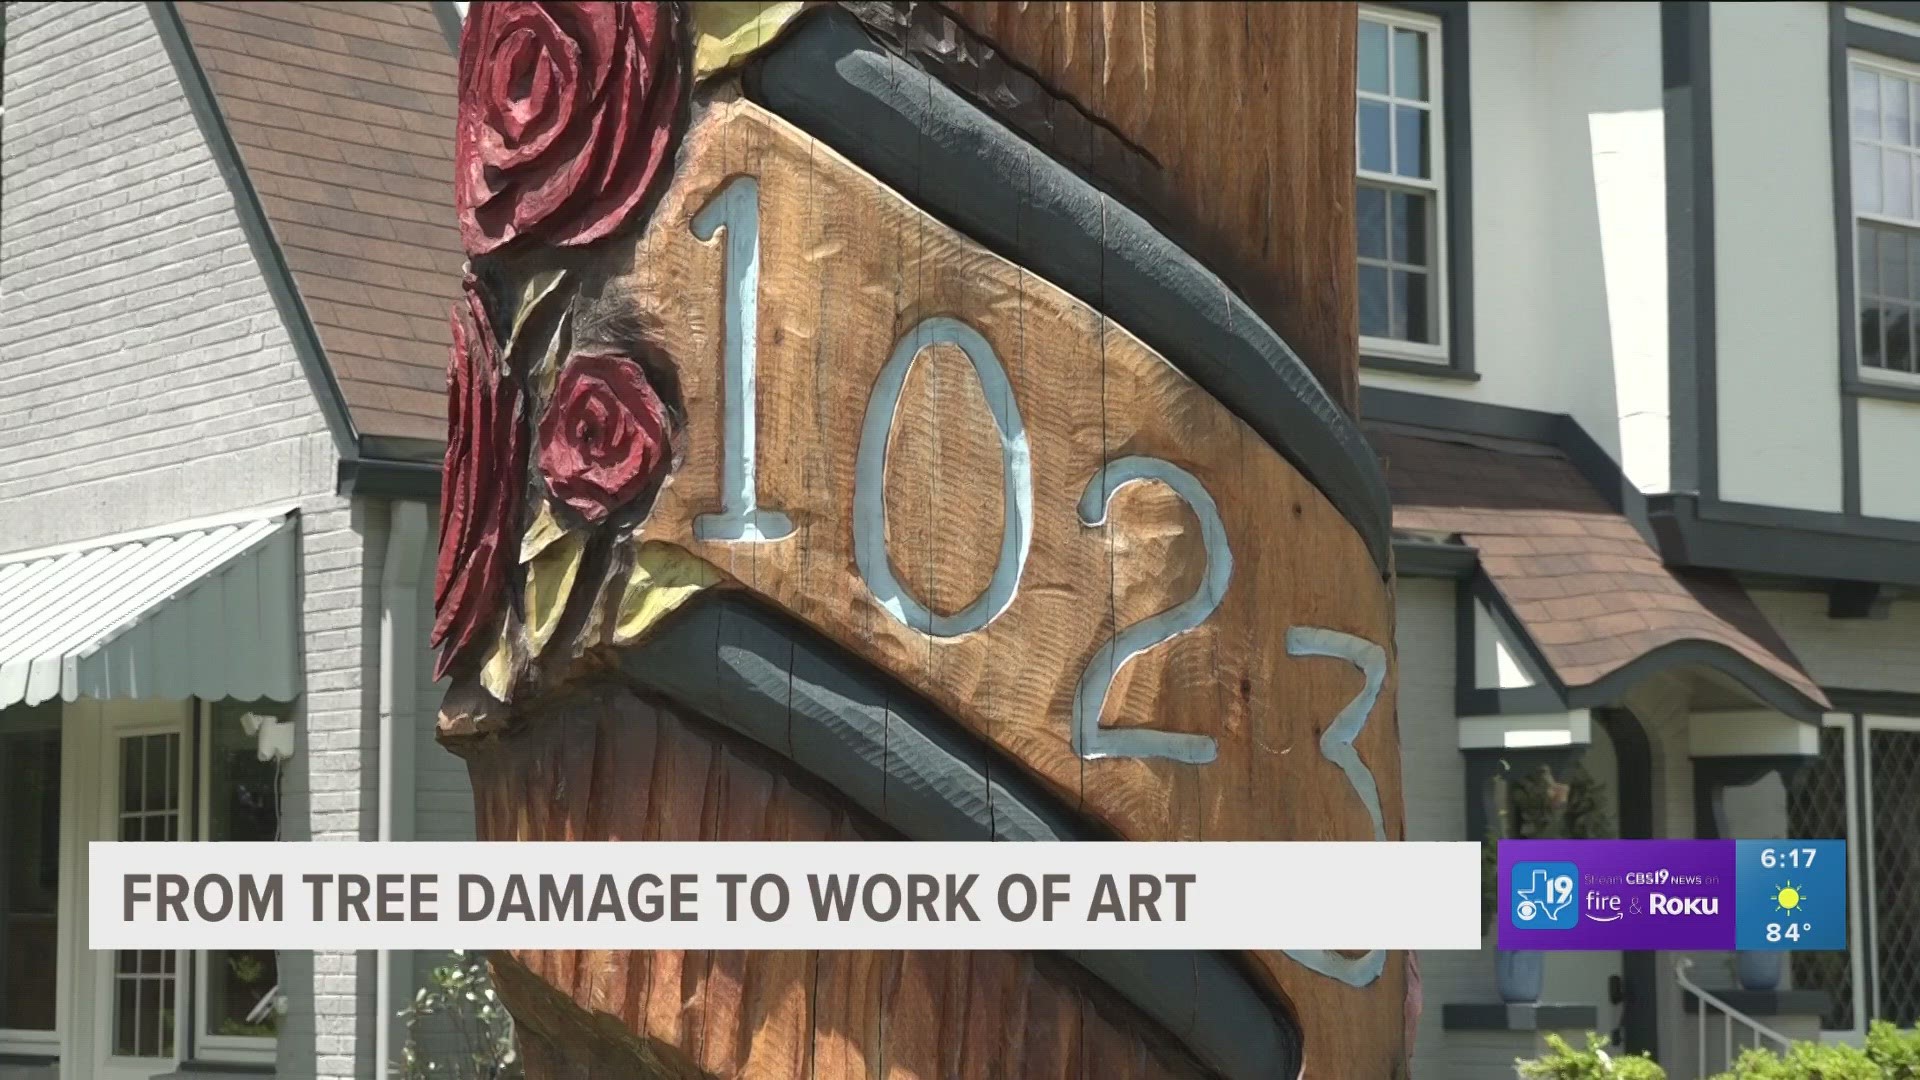 Company brings talents to East Texas by restoring damaged trees into works of art